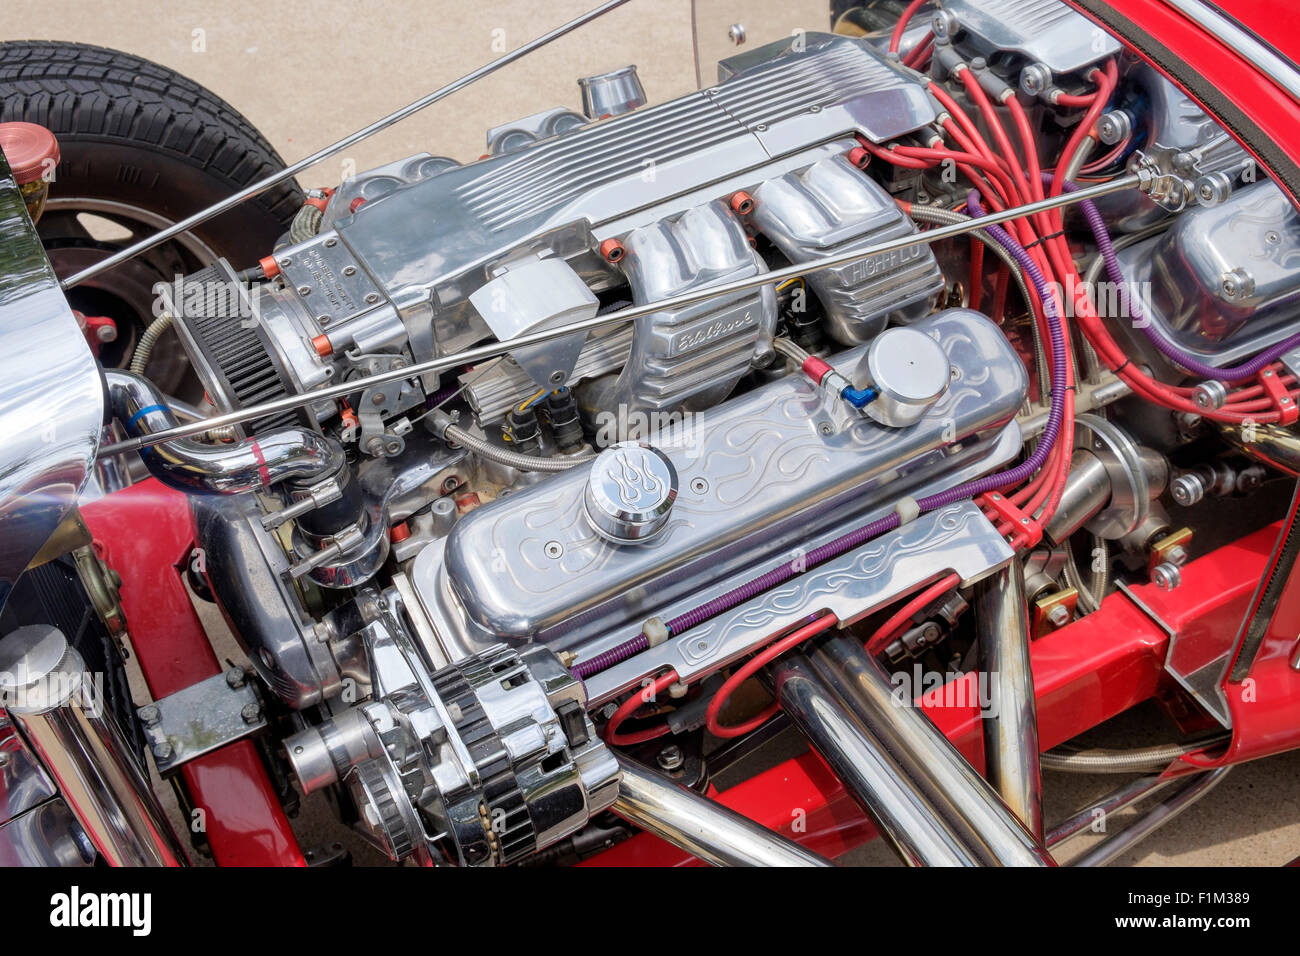 American hot-rod V8 chromed engine with fuel injection system and lots of chrome and polished metal Stock Photo